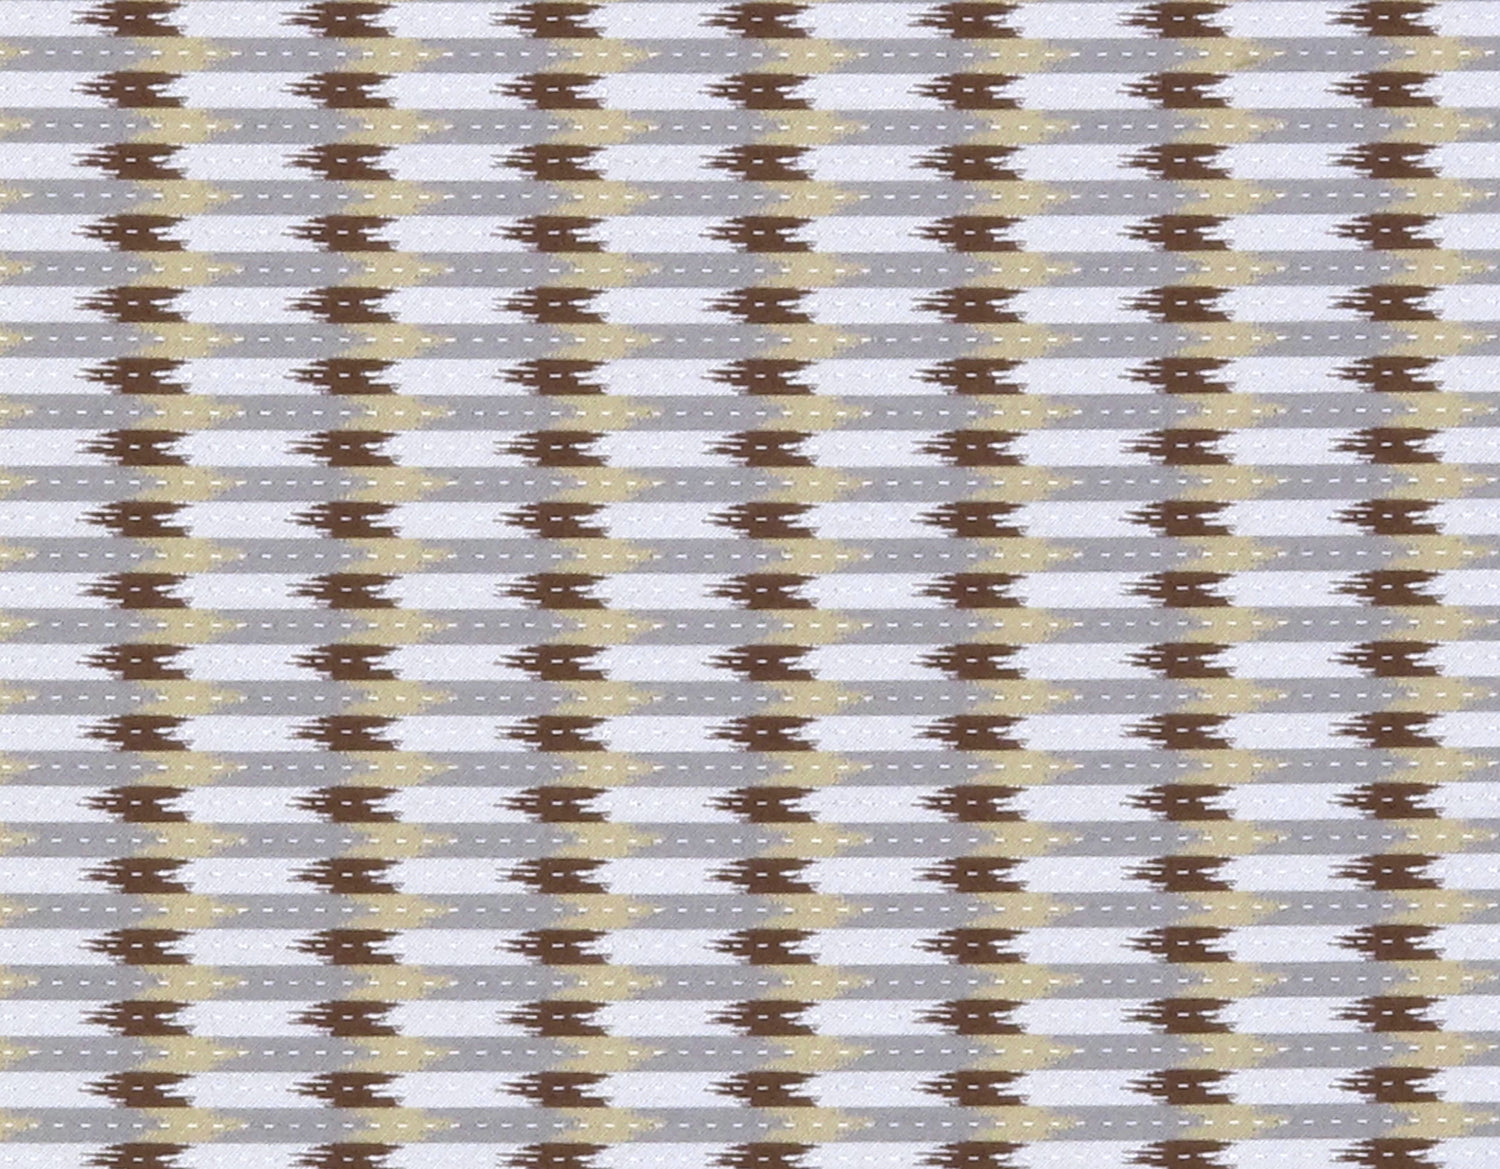 Windward Point fabric in driftwood color - pattern number GH 00332145 - by Scalamandre in the Old World Weavers collection